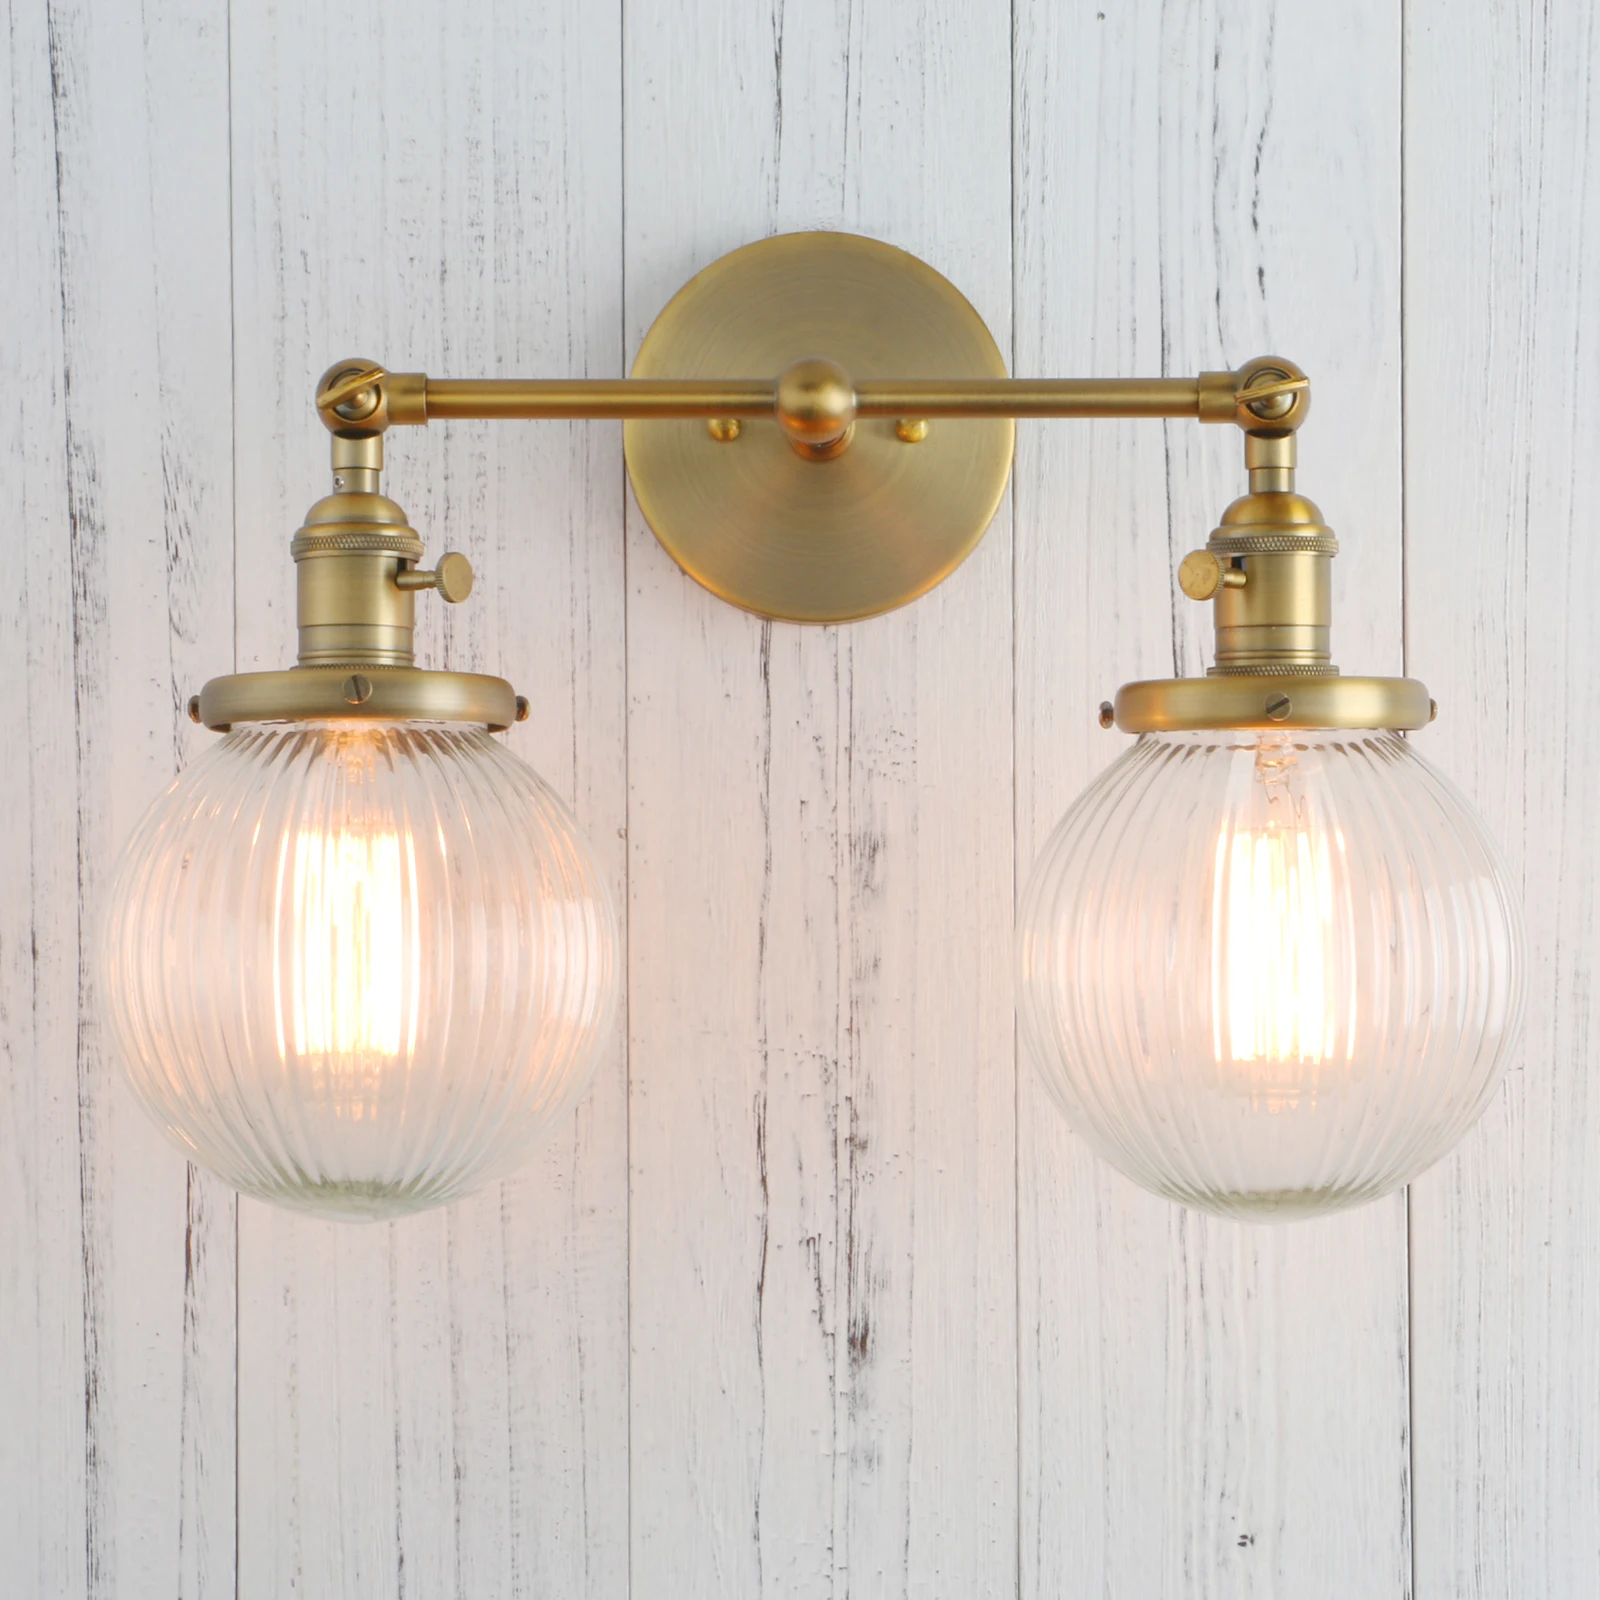 the range wall lights Permo Vintage  with Globe Glass Shade 2 Lights Wall Sconces Double Head Wall Lights with Switch Retro Style Rustic Wall Lamps wall lamps Wall Lamps